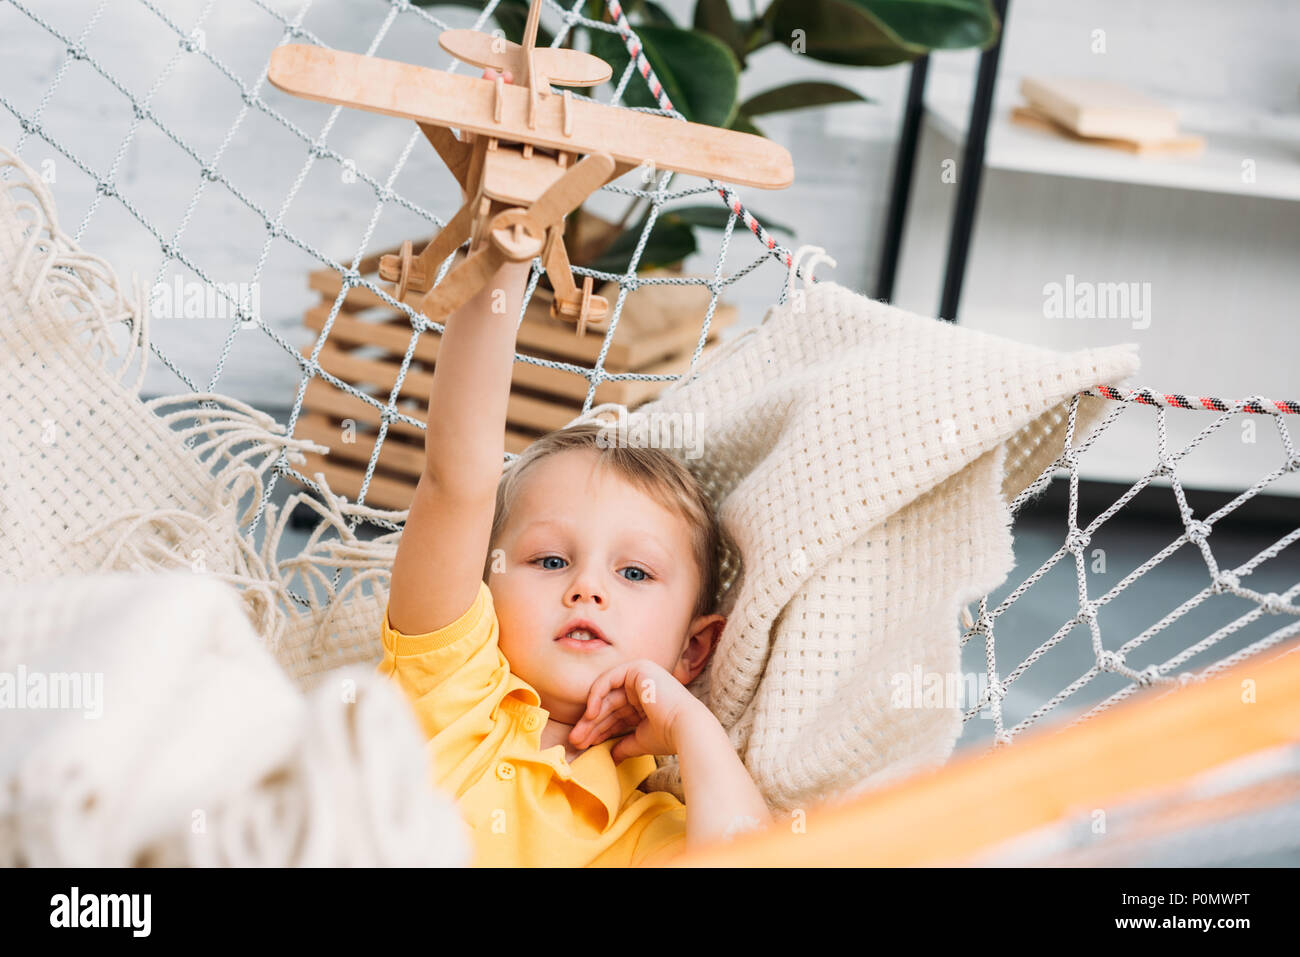 Happy boy playing with wooden airplane toy in hammock Stock Photo